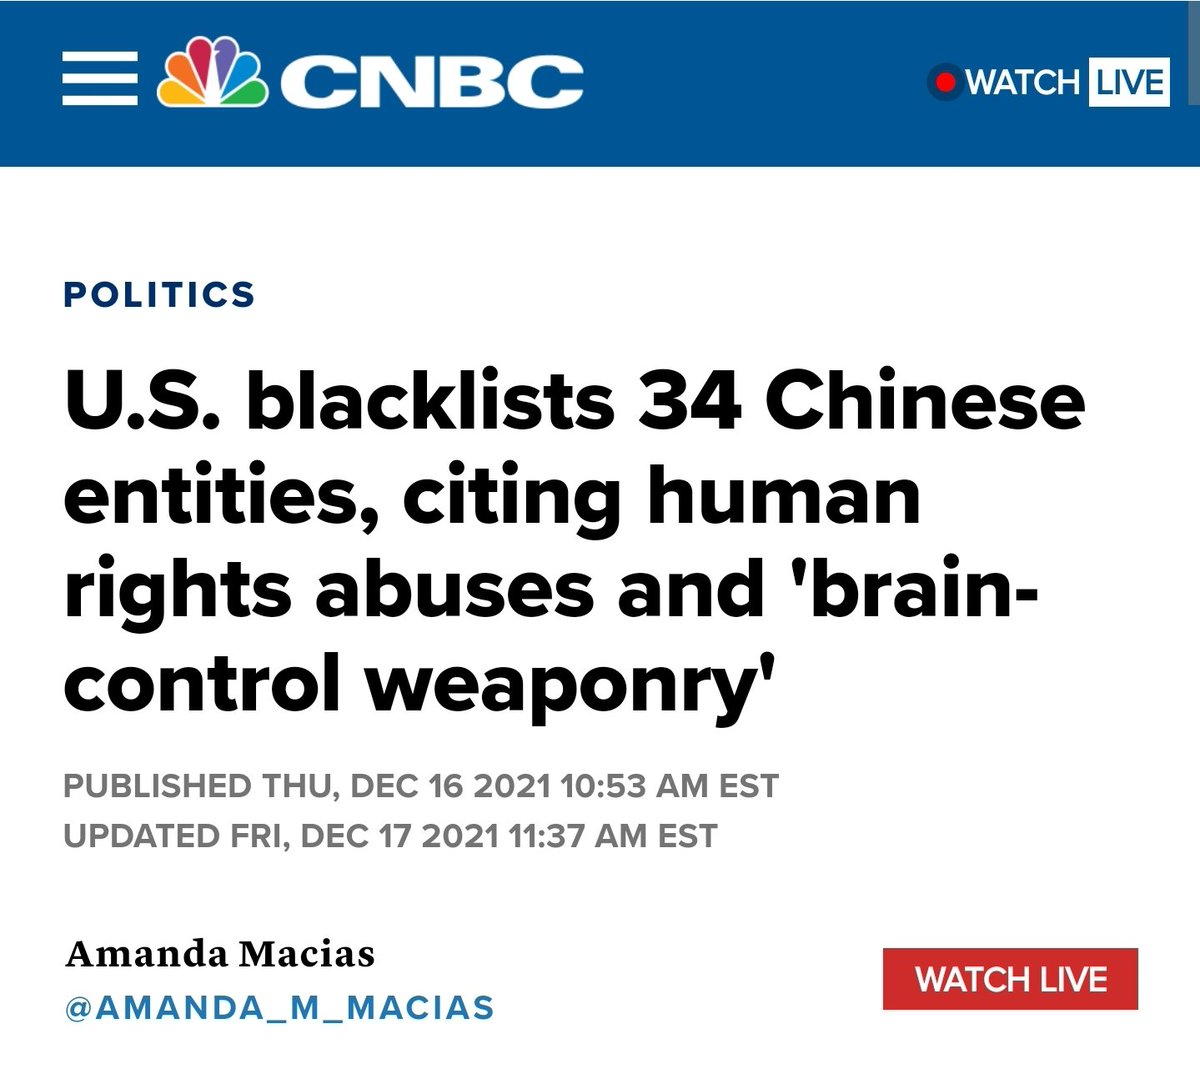 The below-linked article depicts a wearable EMG sensor. Contactless methods exist for remote EMG monitoring/hacking without such 'wetware', however. Cybercriminals utilizing certain 'brain tech' like the sanctioned, portable Chinese variety from over 38 Chinese manufacturers…